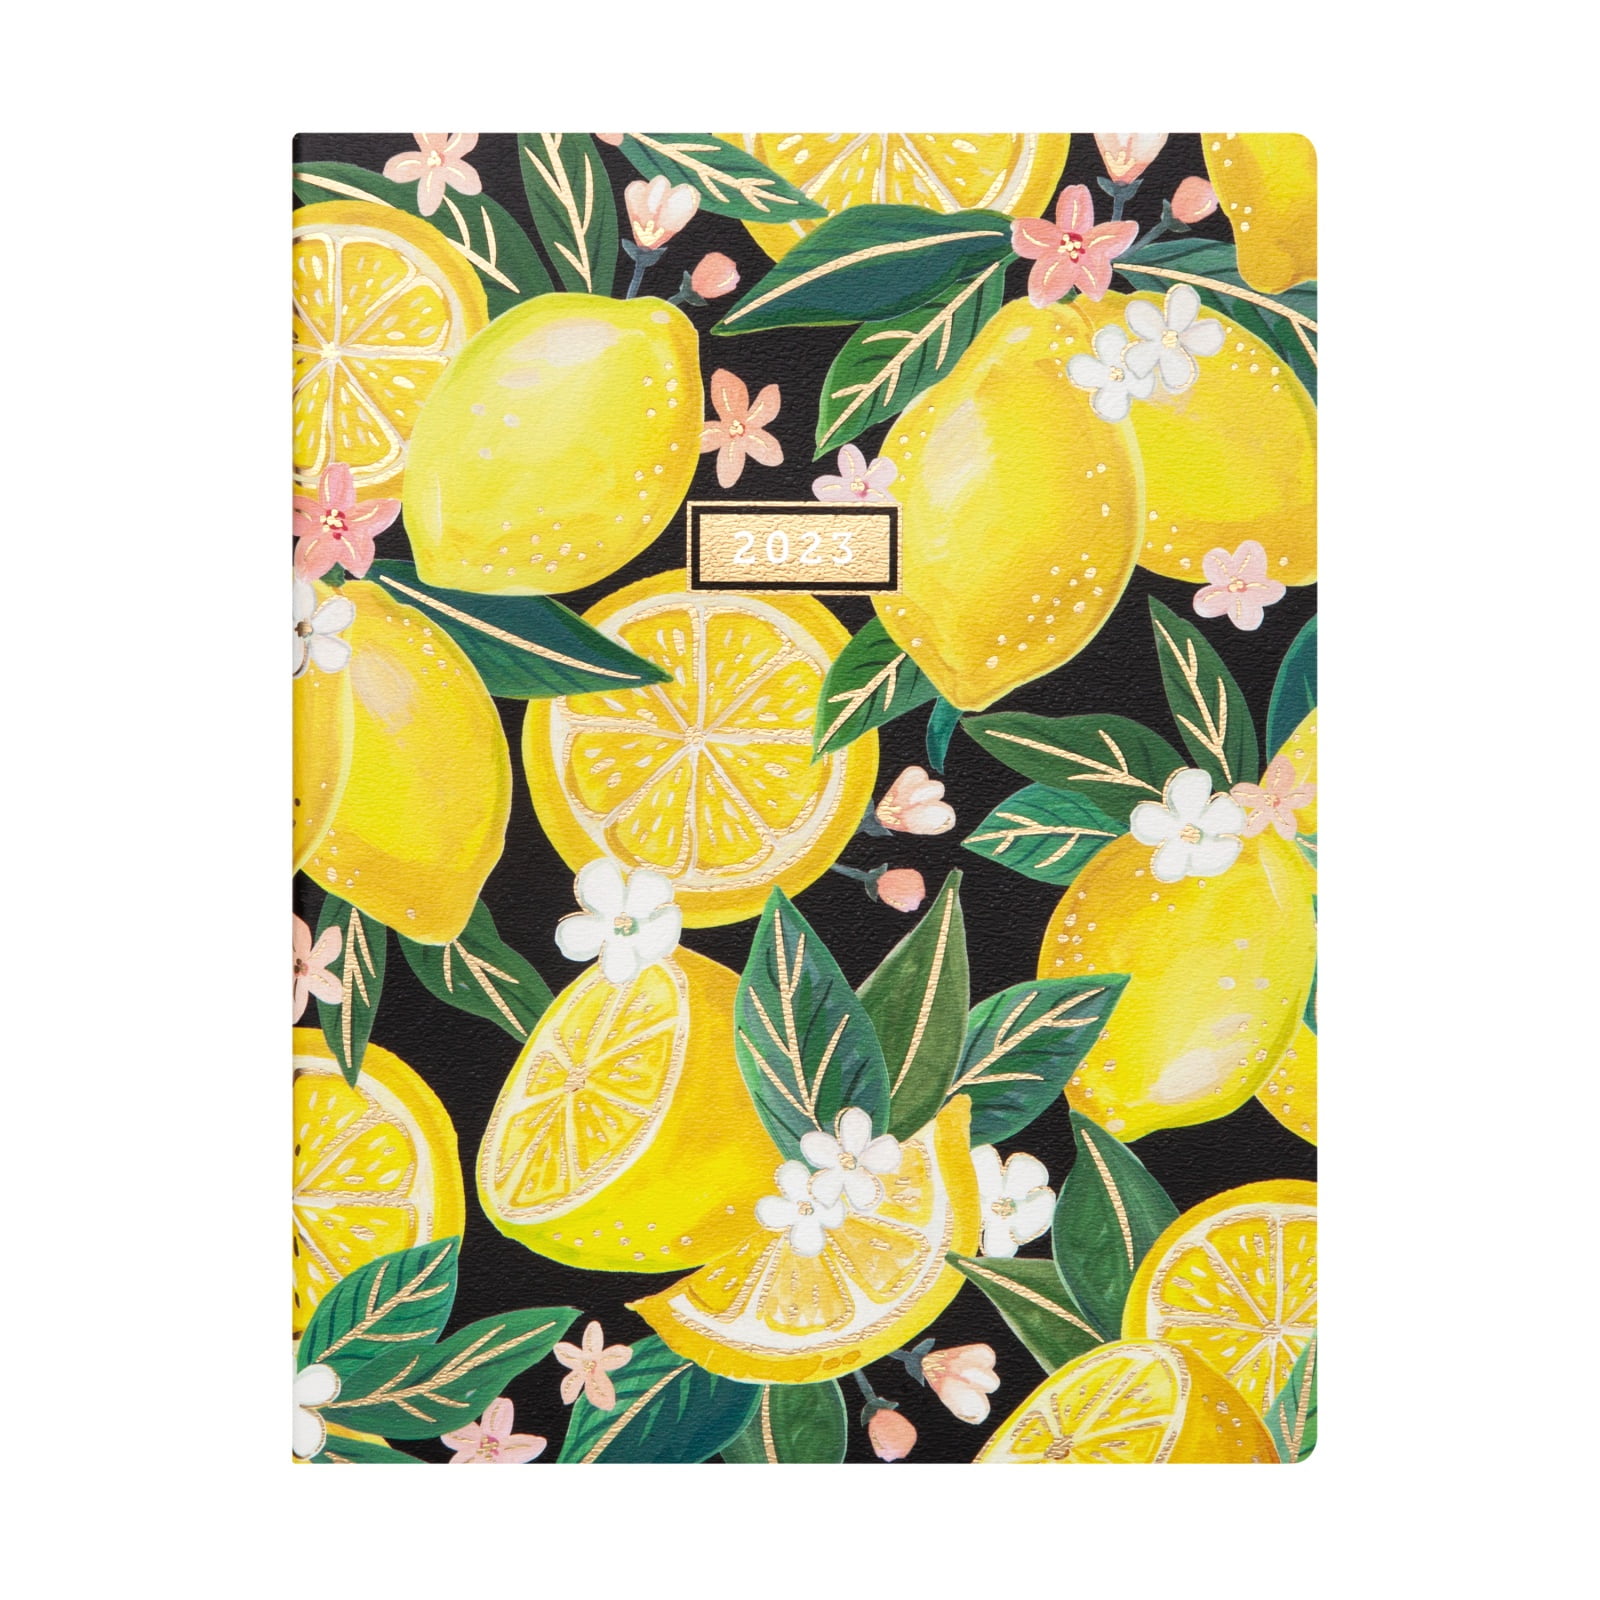 2023 Year Monthly Planner, 6.75"x8.75", Lemons by Mintgreen